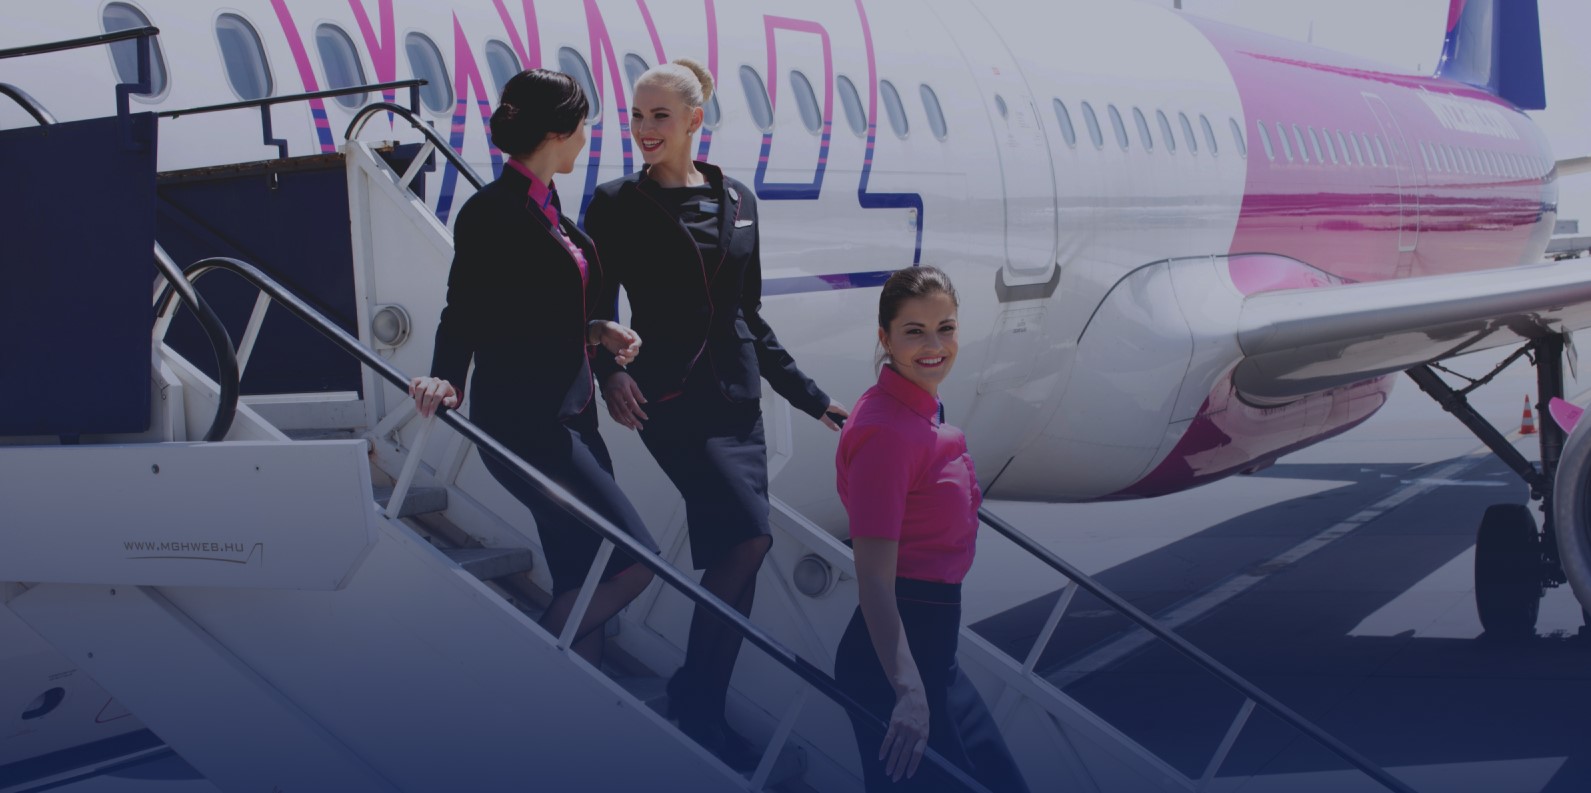 Stop elbow wine Aviation & Airline Jobs | Job Search | Wizz Air